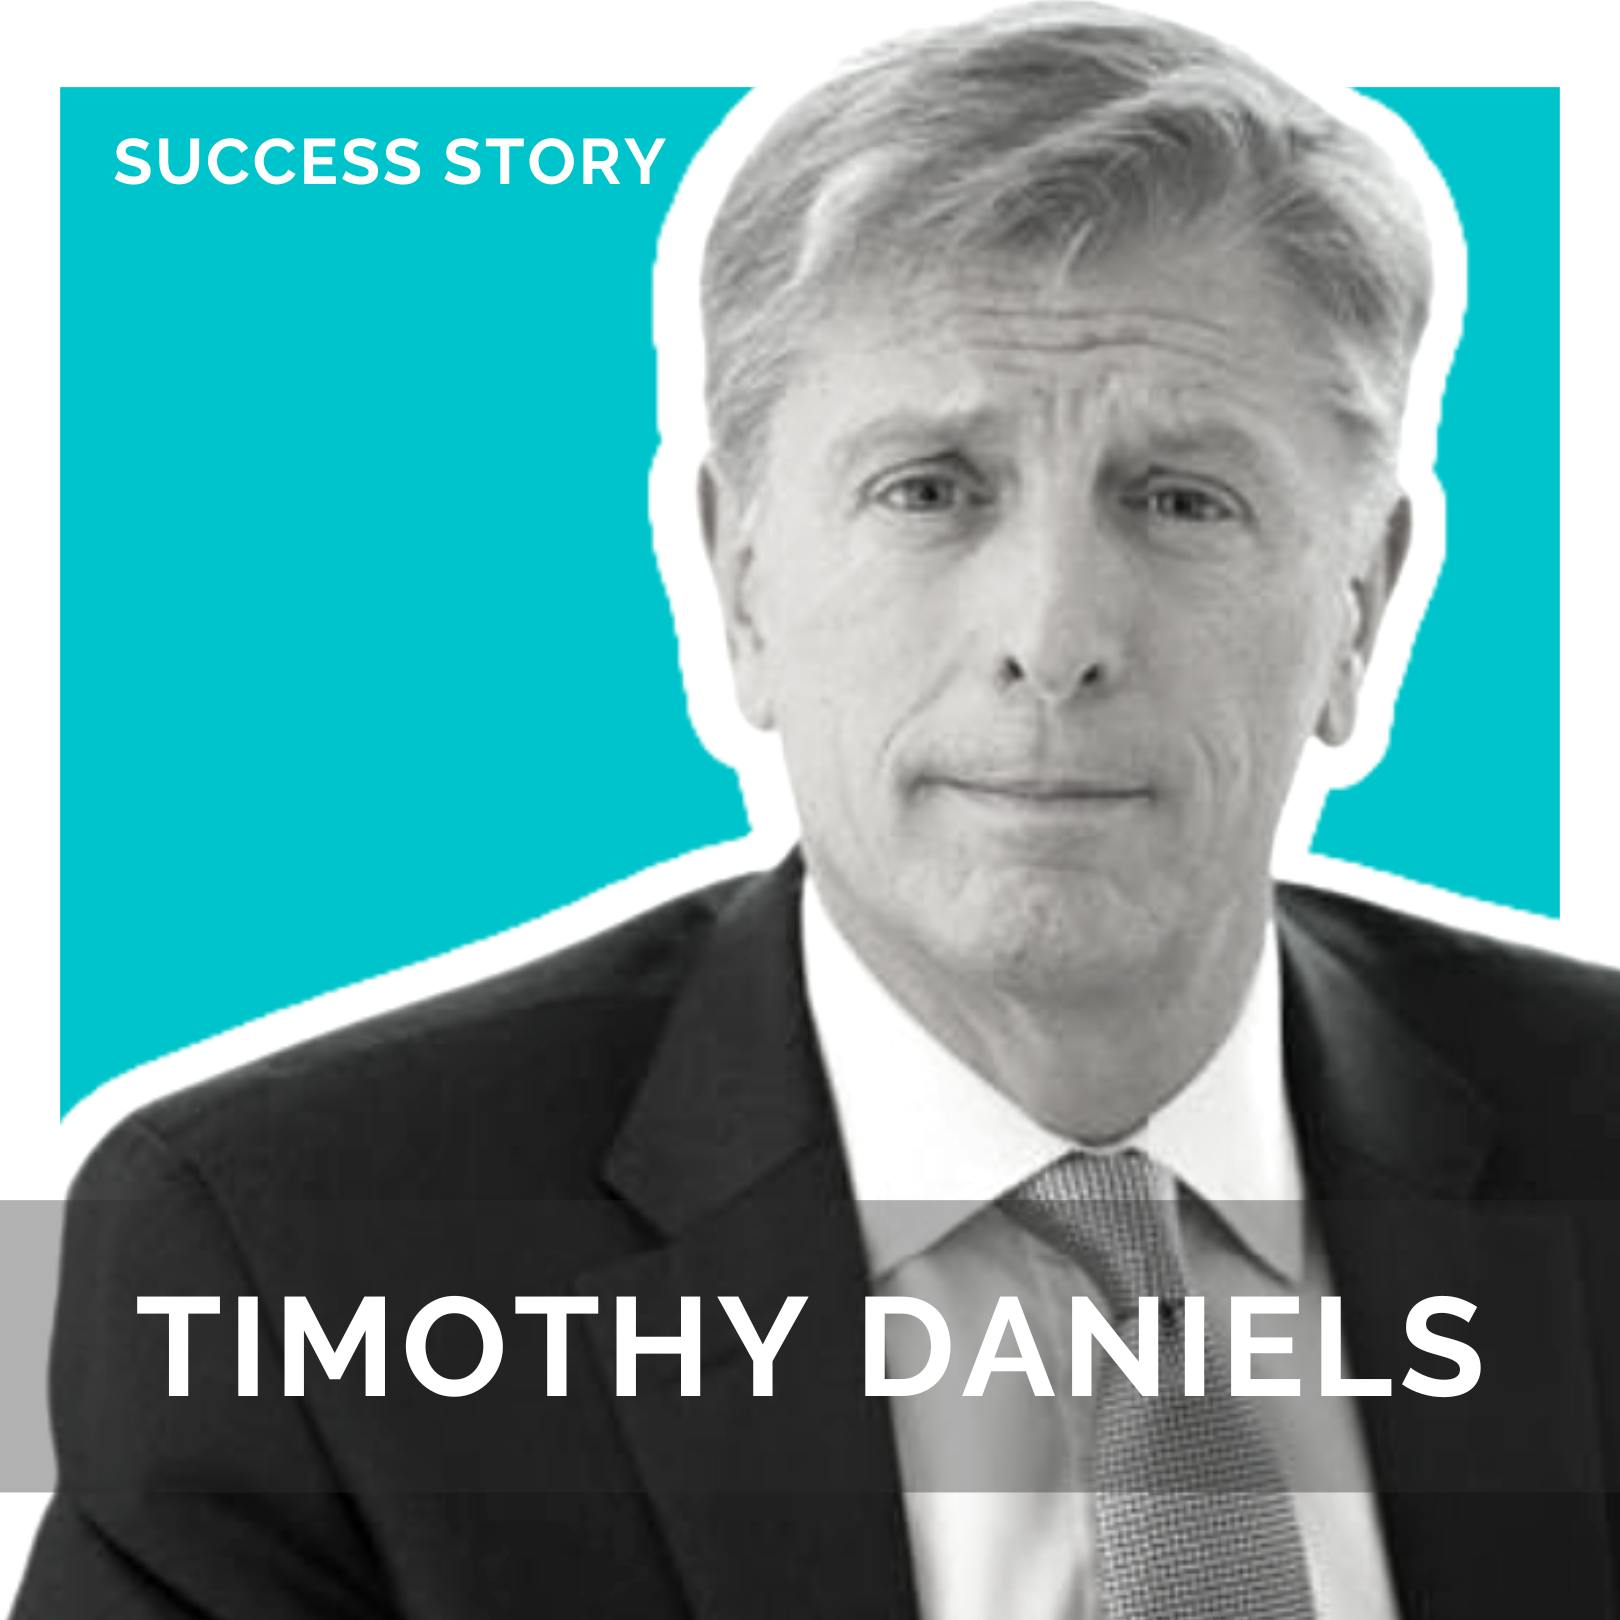 Timothy Daniels - President and CEO of TIGER 21 | The Membership Club For Billionaires